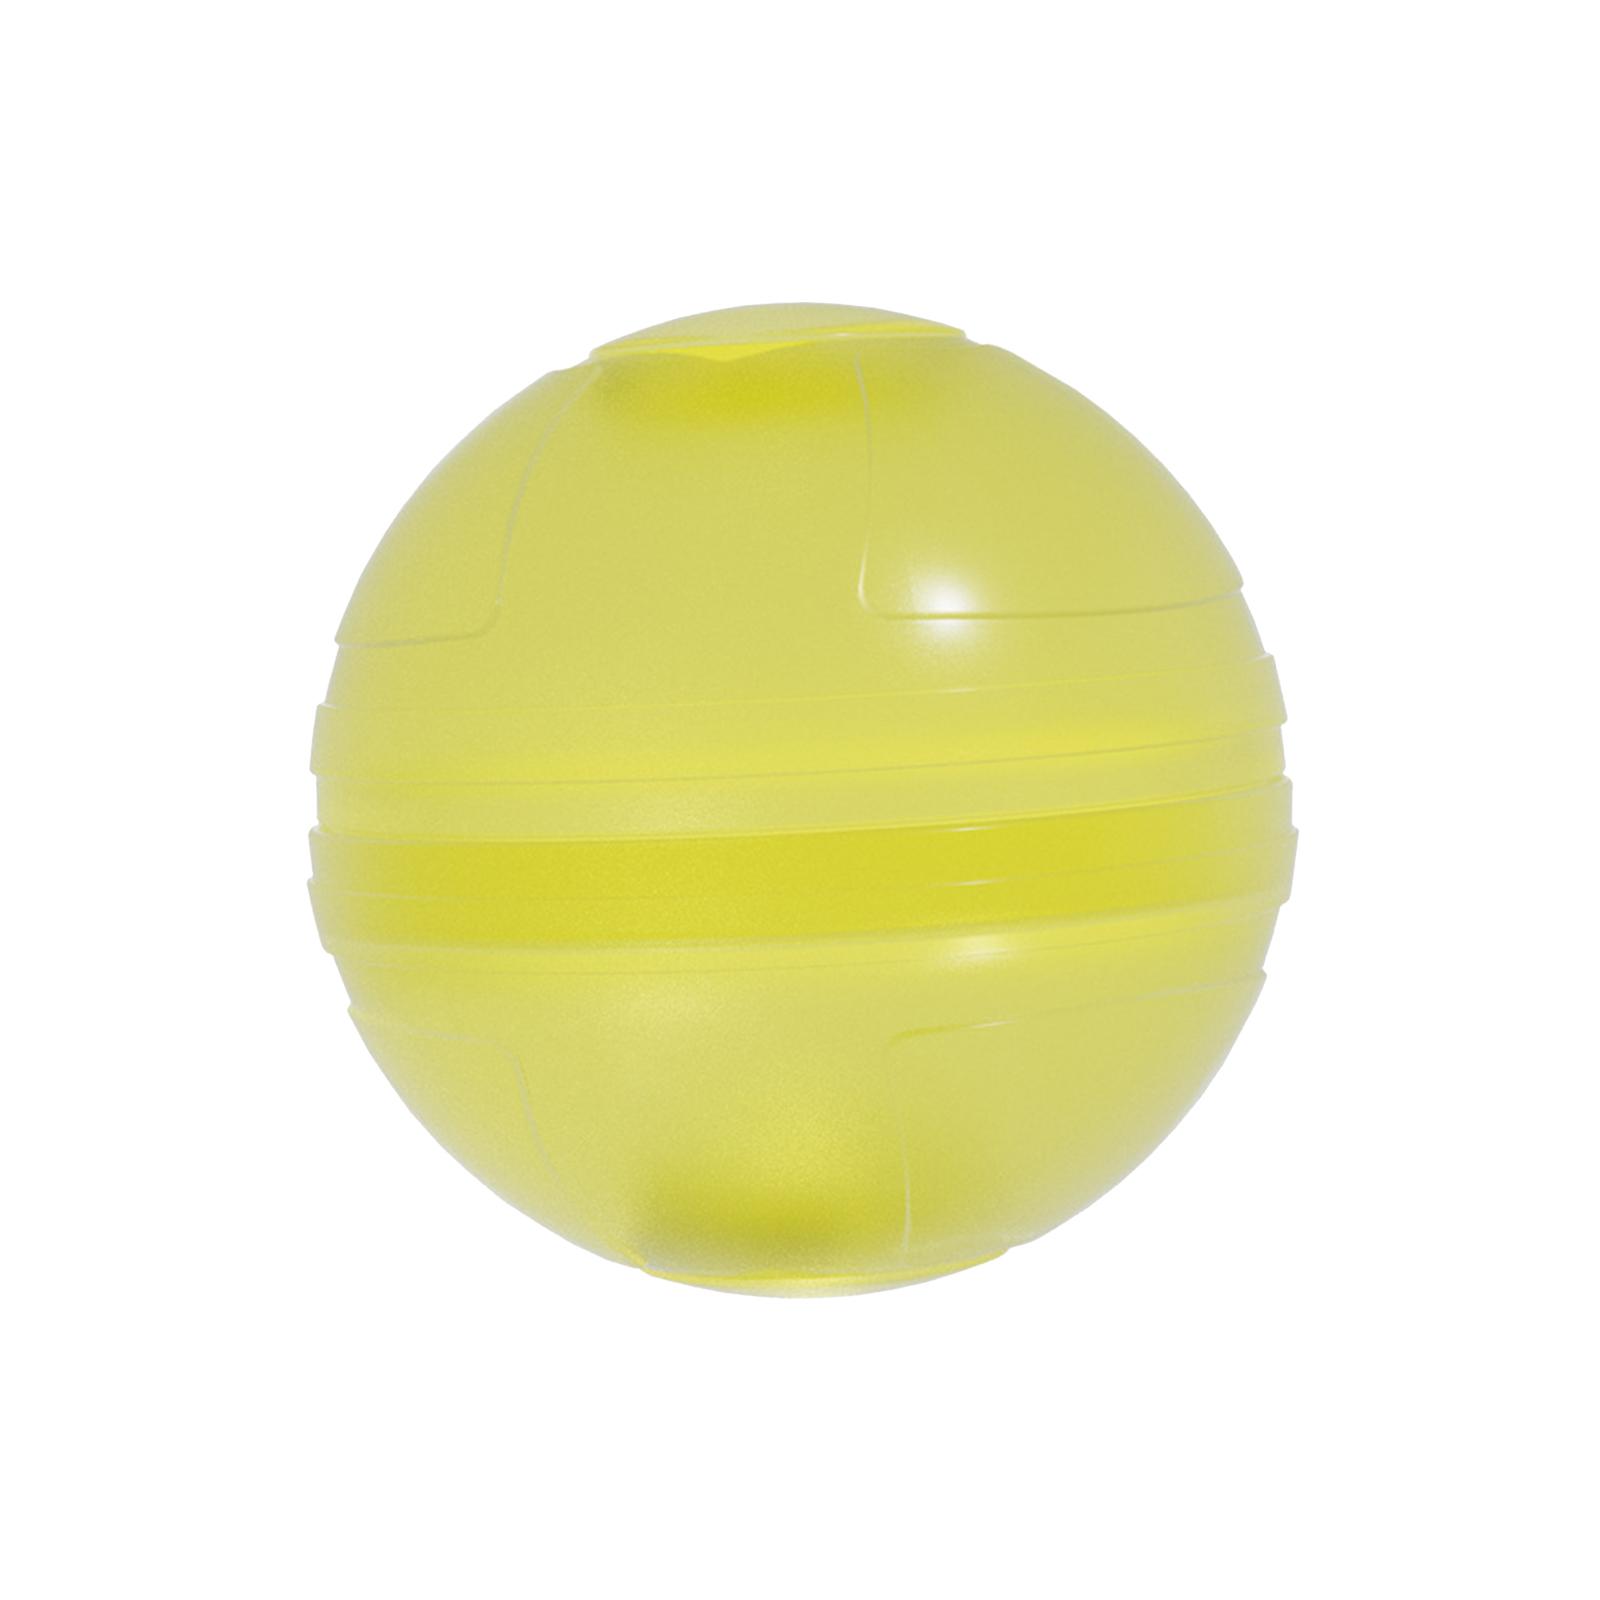 Reusable Water Balloons Refillable Water Outdoor Water Toys for Families Fun Glowing Yellow